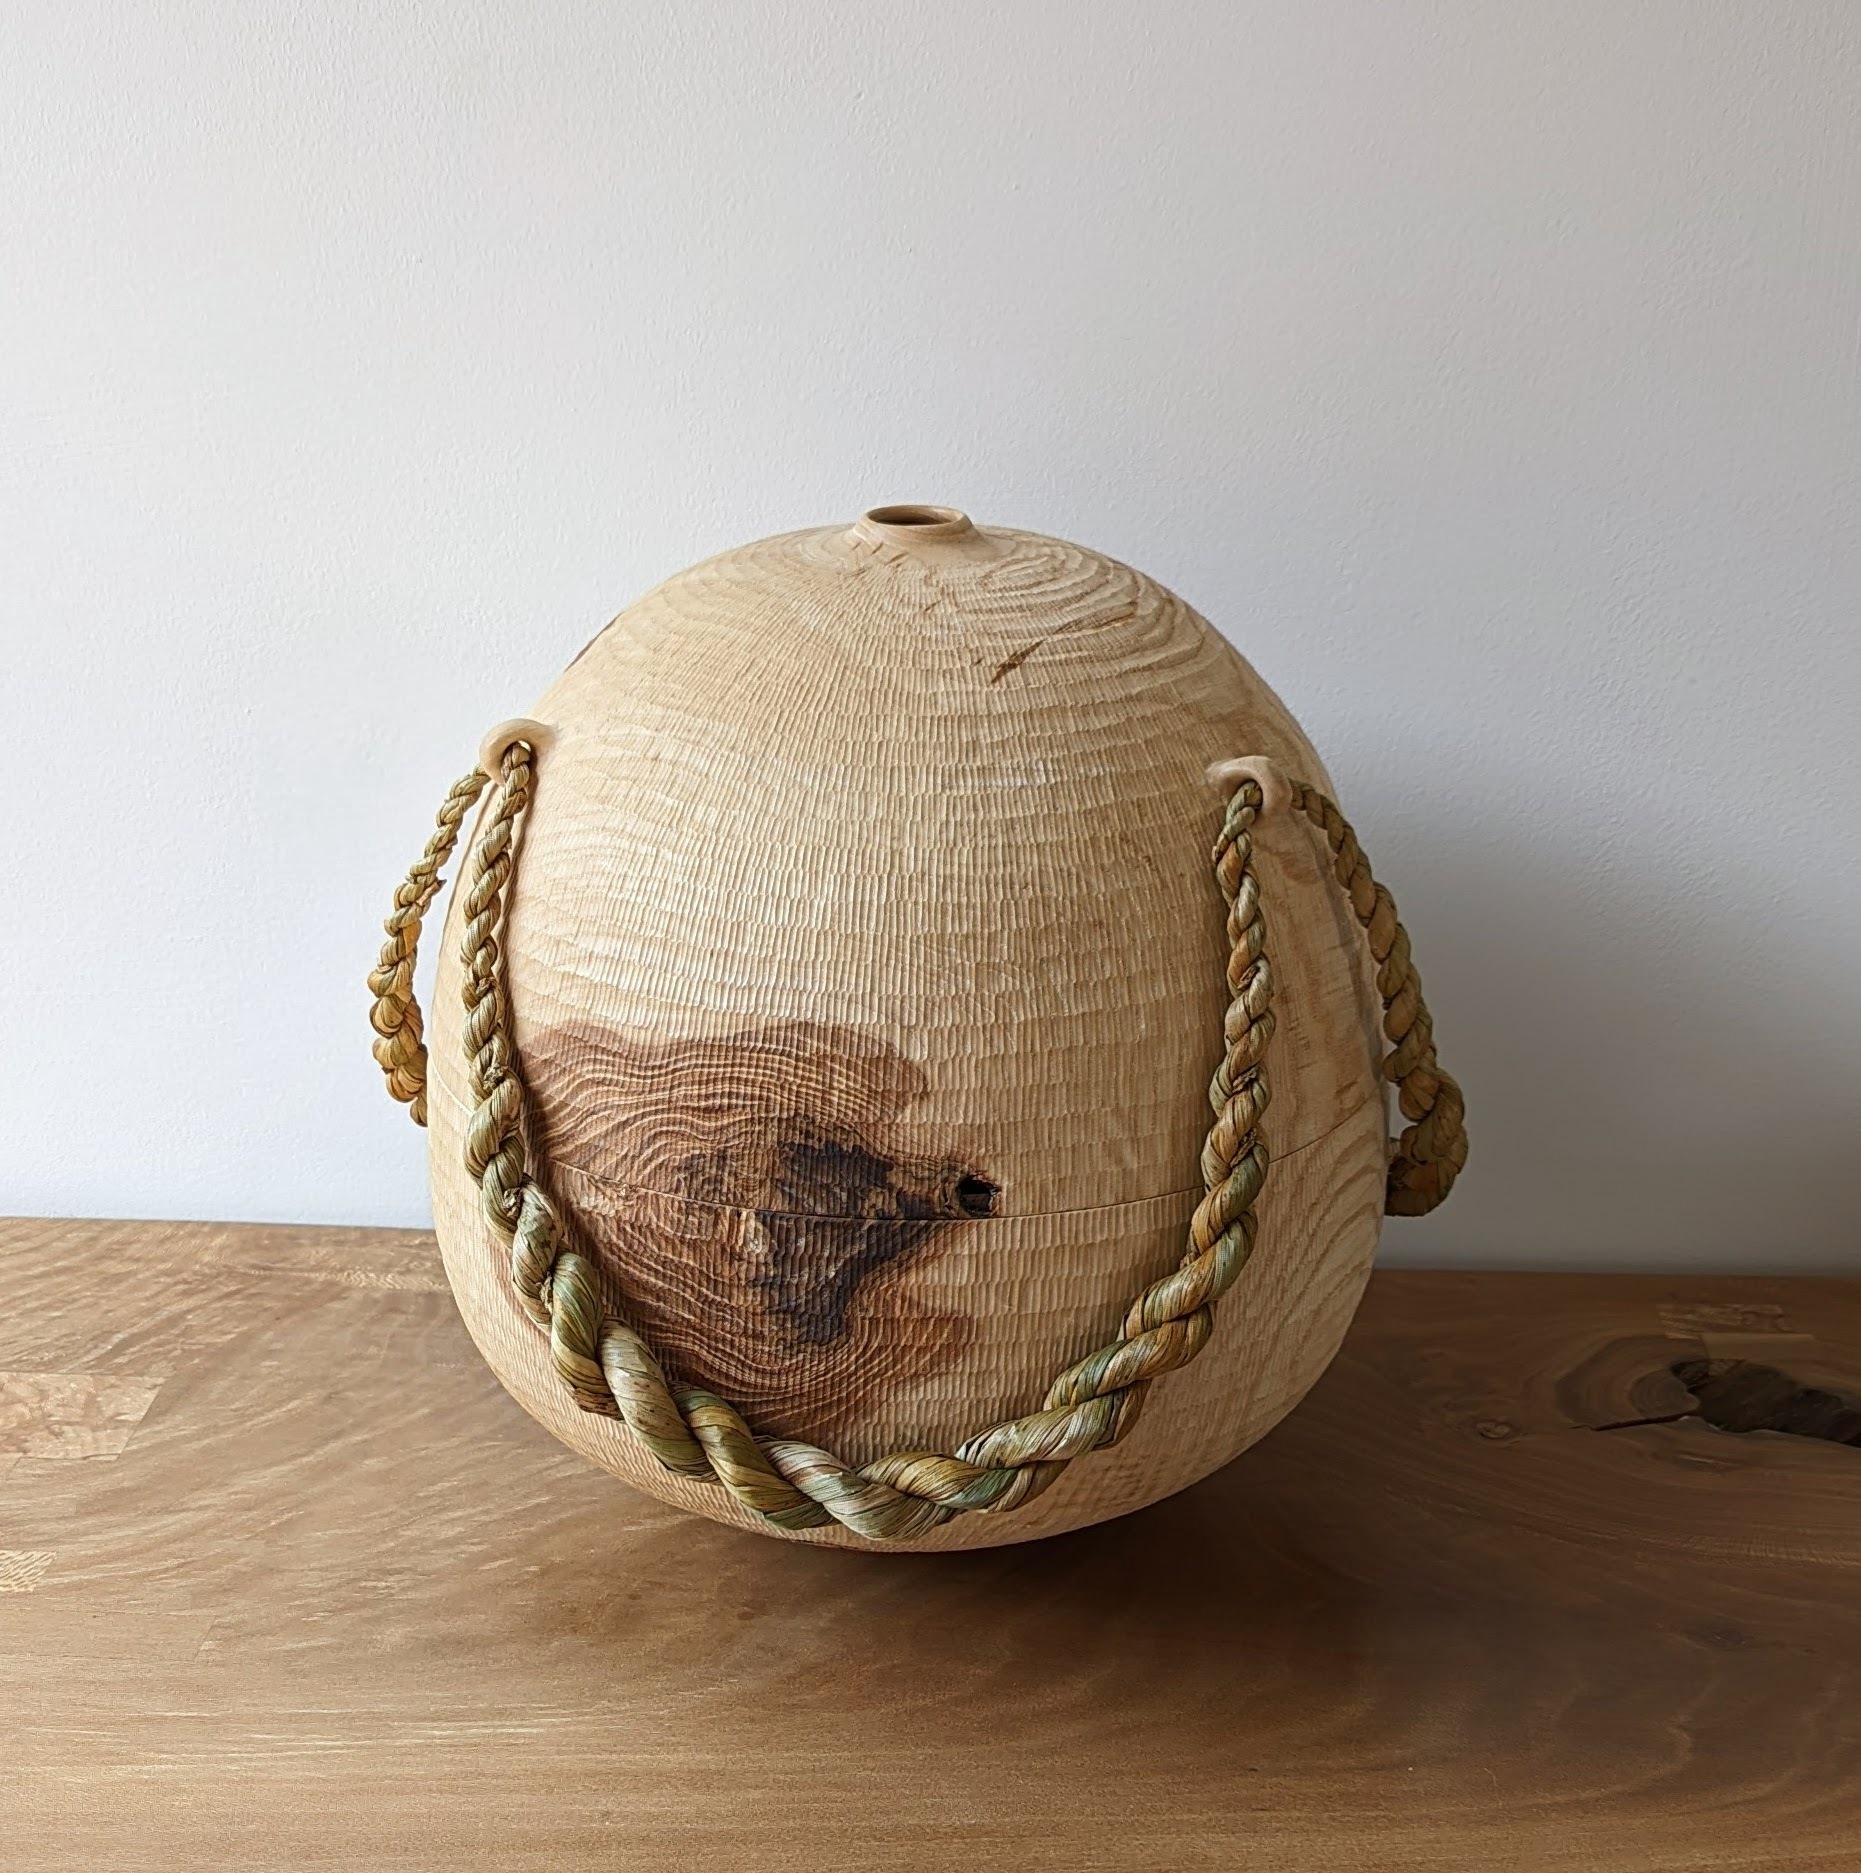 A carved wooden vessel with rope embellishments